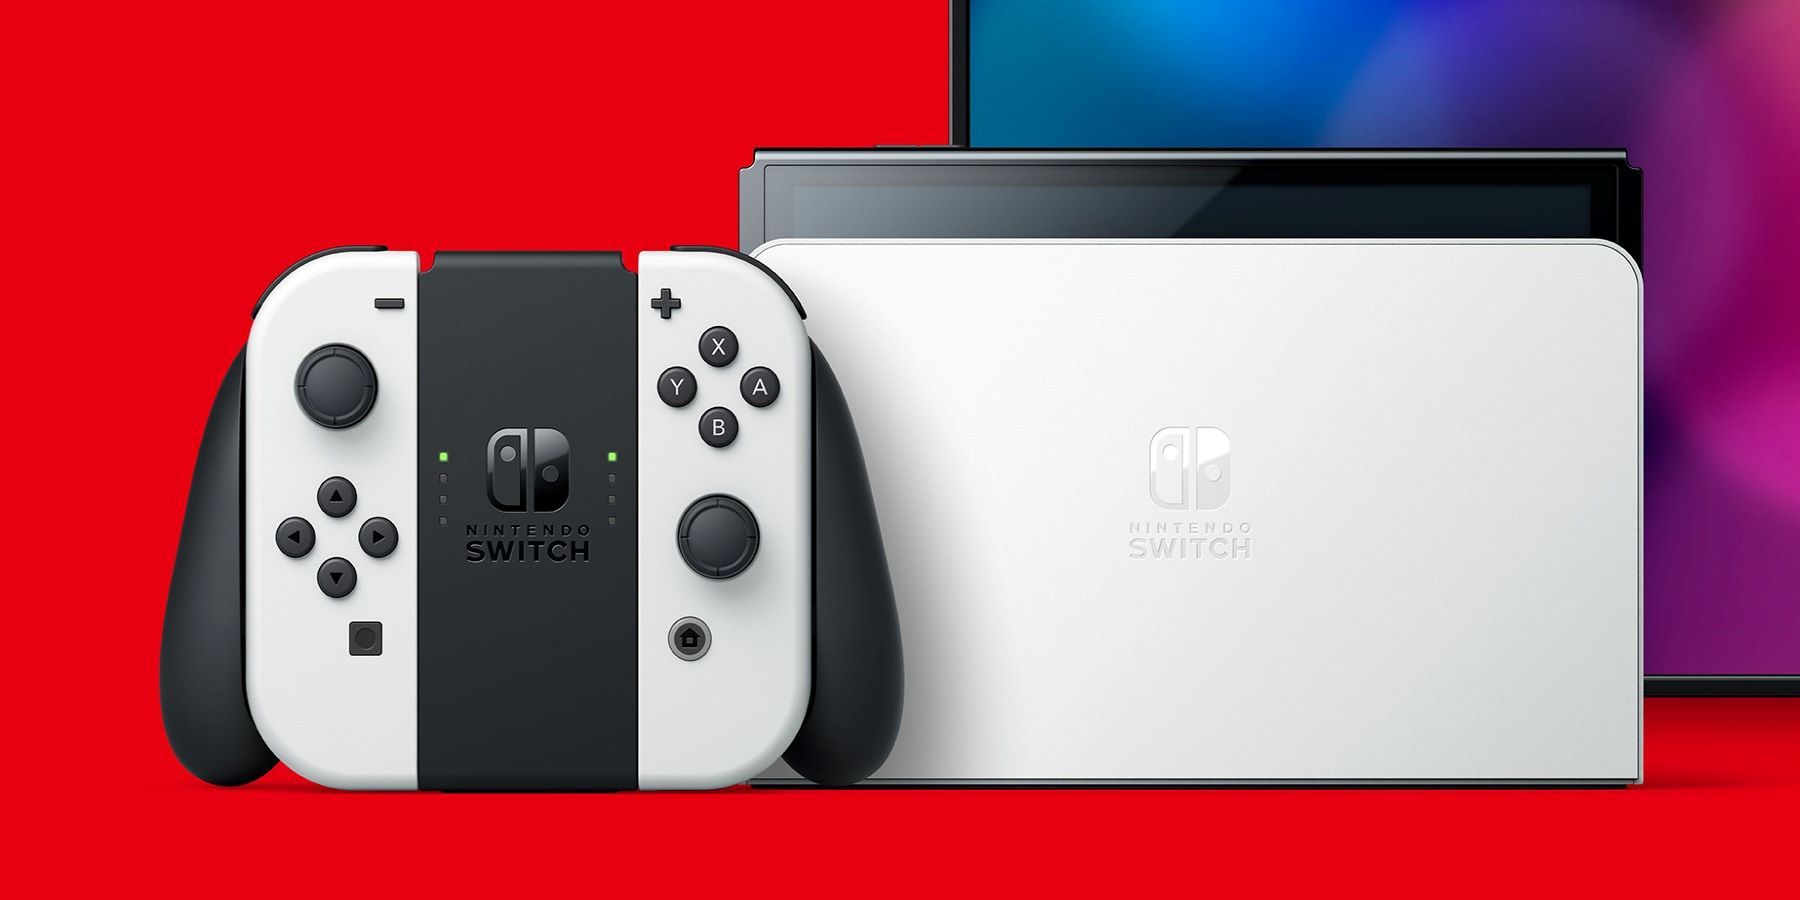 Promotional art of the Nintendo Switch OLED in front of a TV on a red background